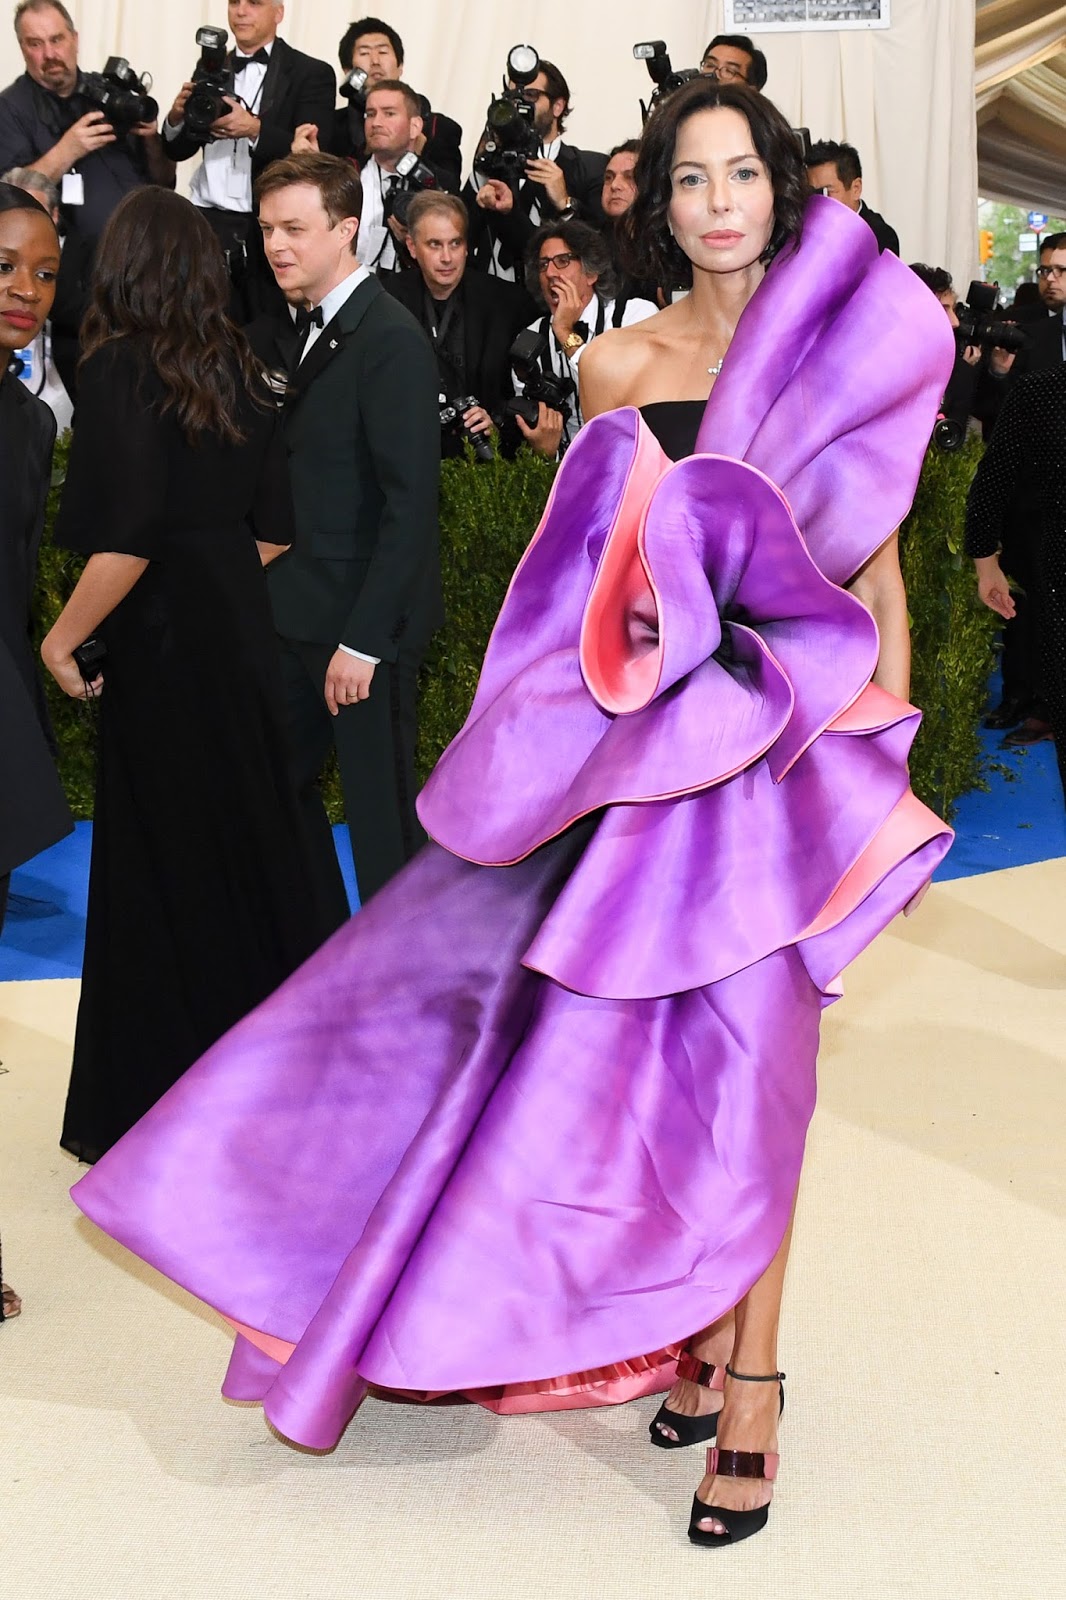 The MET GALA: It's about the DRAMA